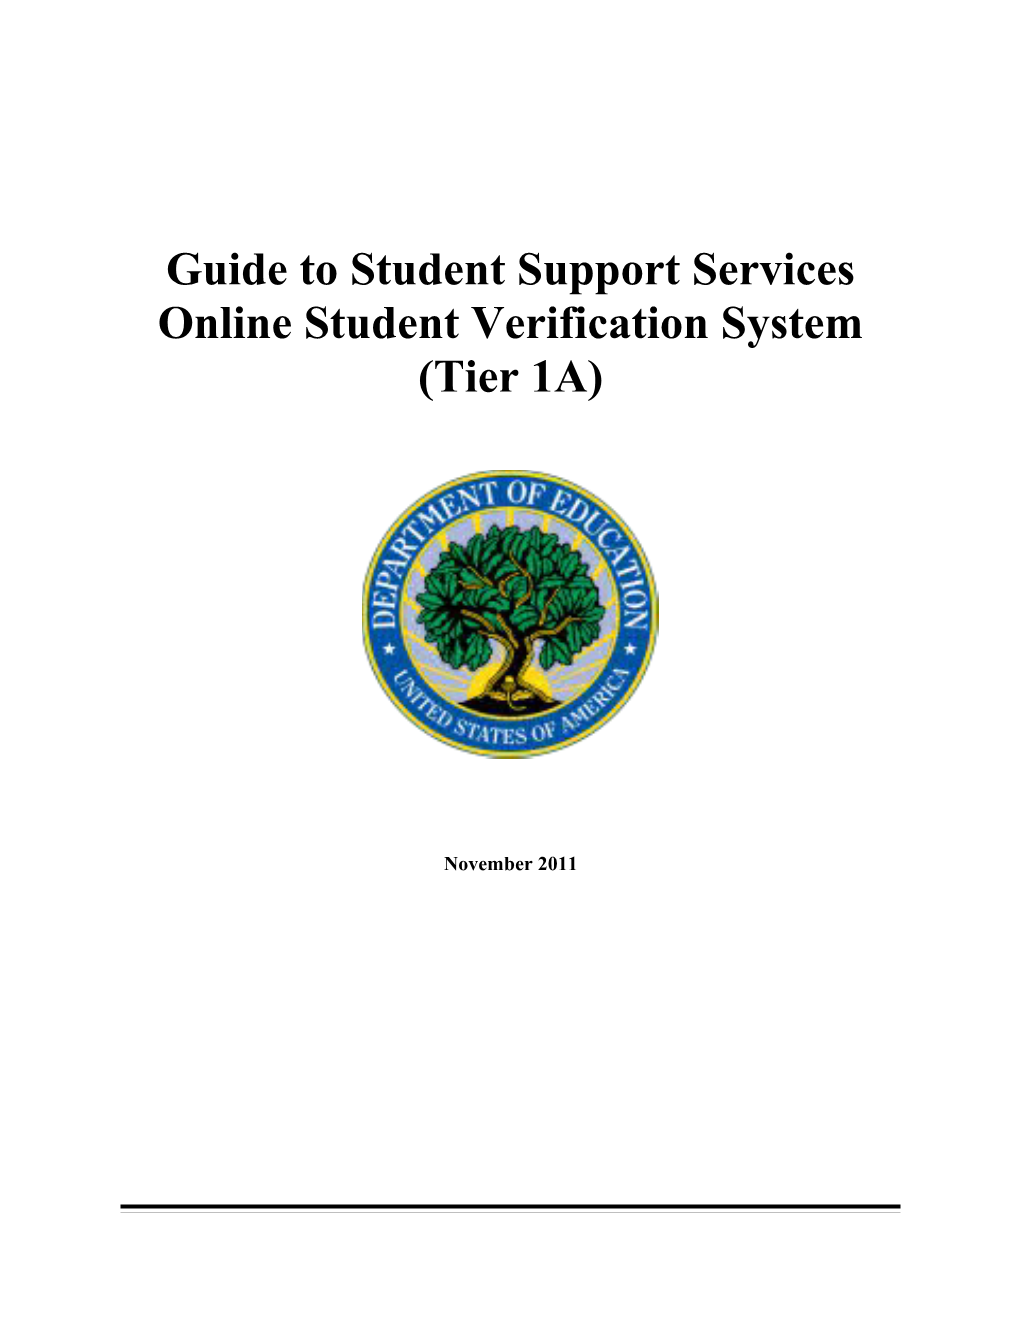 Tier 1A Student Records Verification - Guide (MS Word)